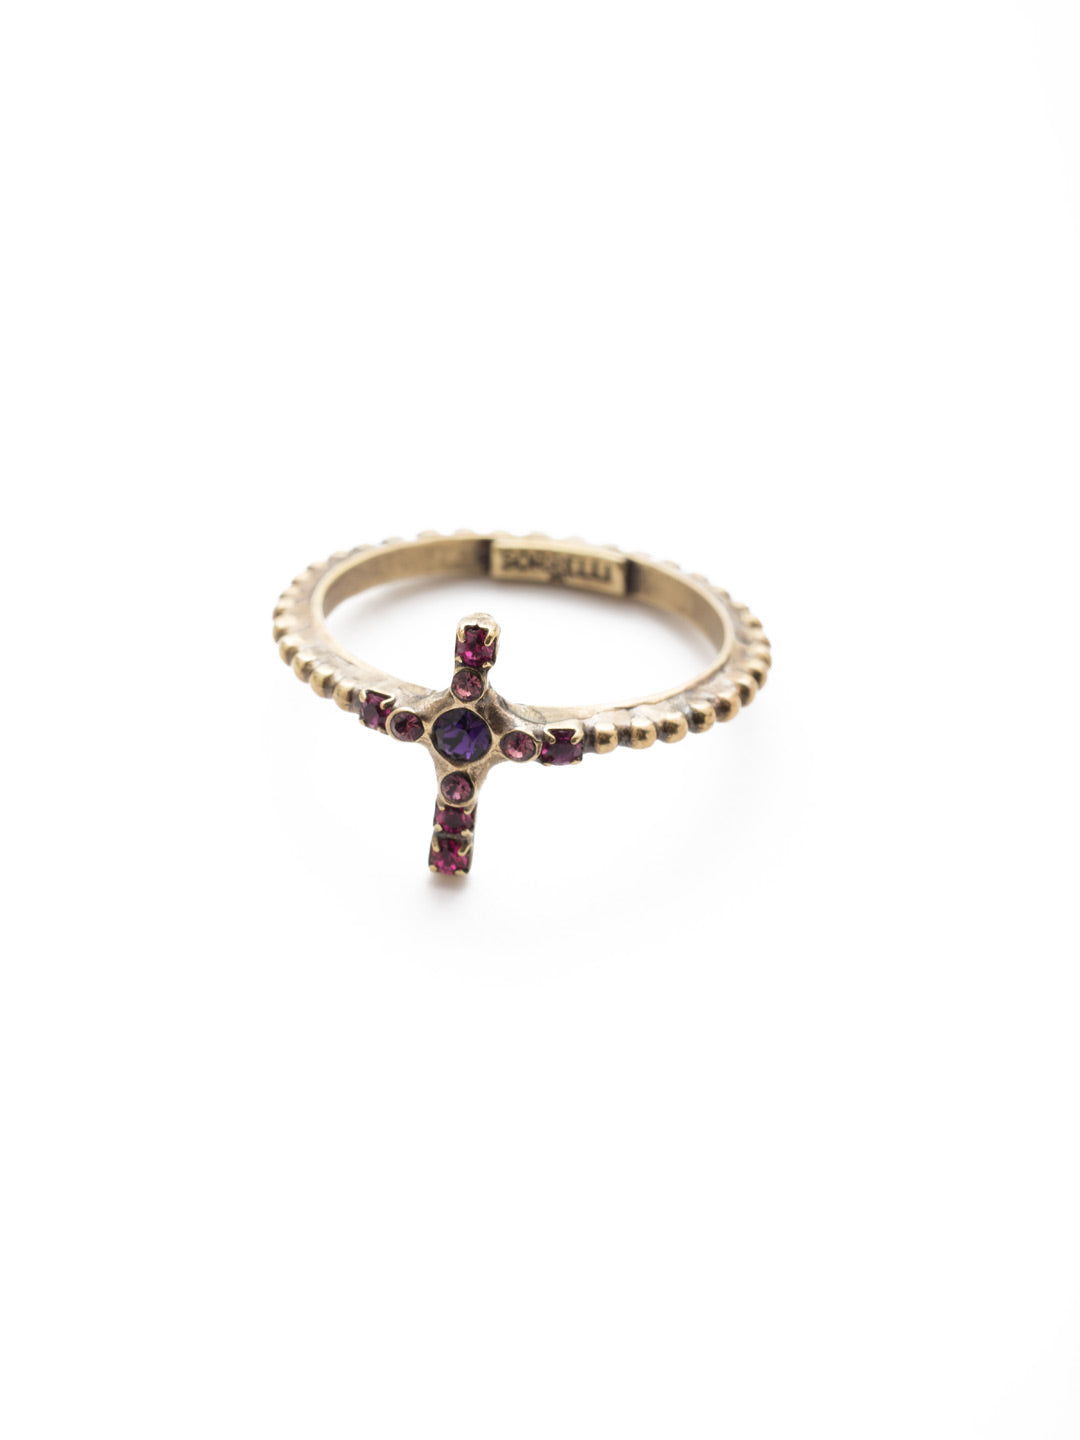 Monique Band Ring - REN1AGDCS - <p>The Monique Band Ring is the piece you're looking for when you want to wear a cross in a unique and fun way. Just slide on this hammered metal beauty. From Sorrelli's Duchess collection in our Antique Gold-tone finish.</p>